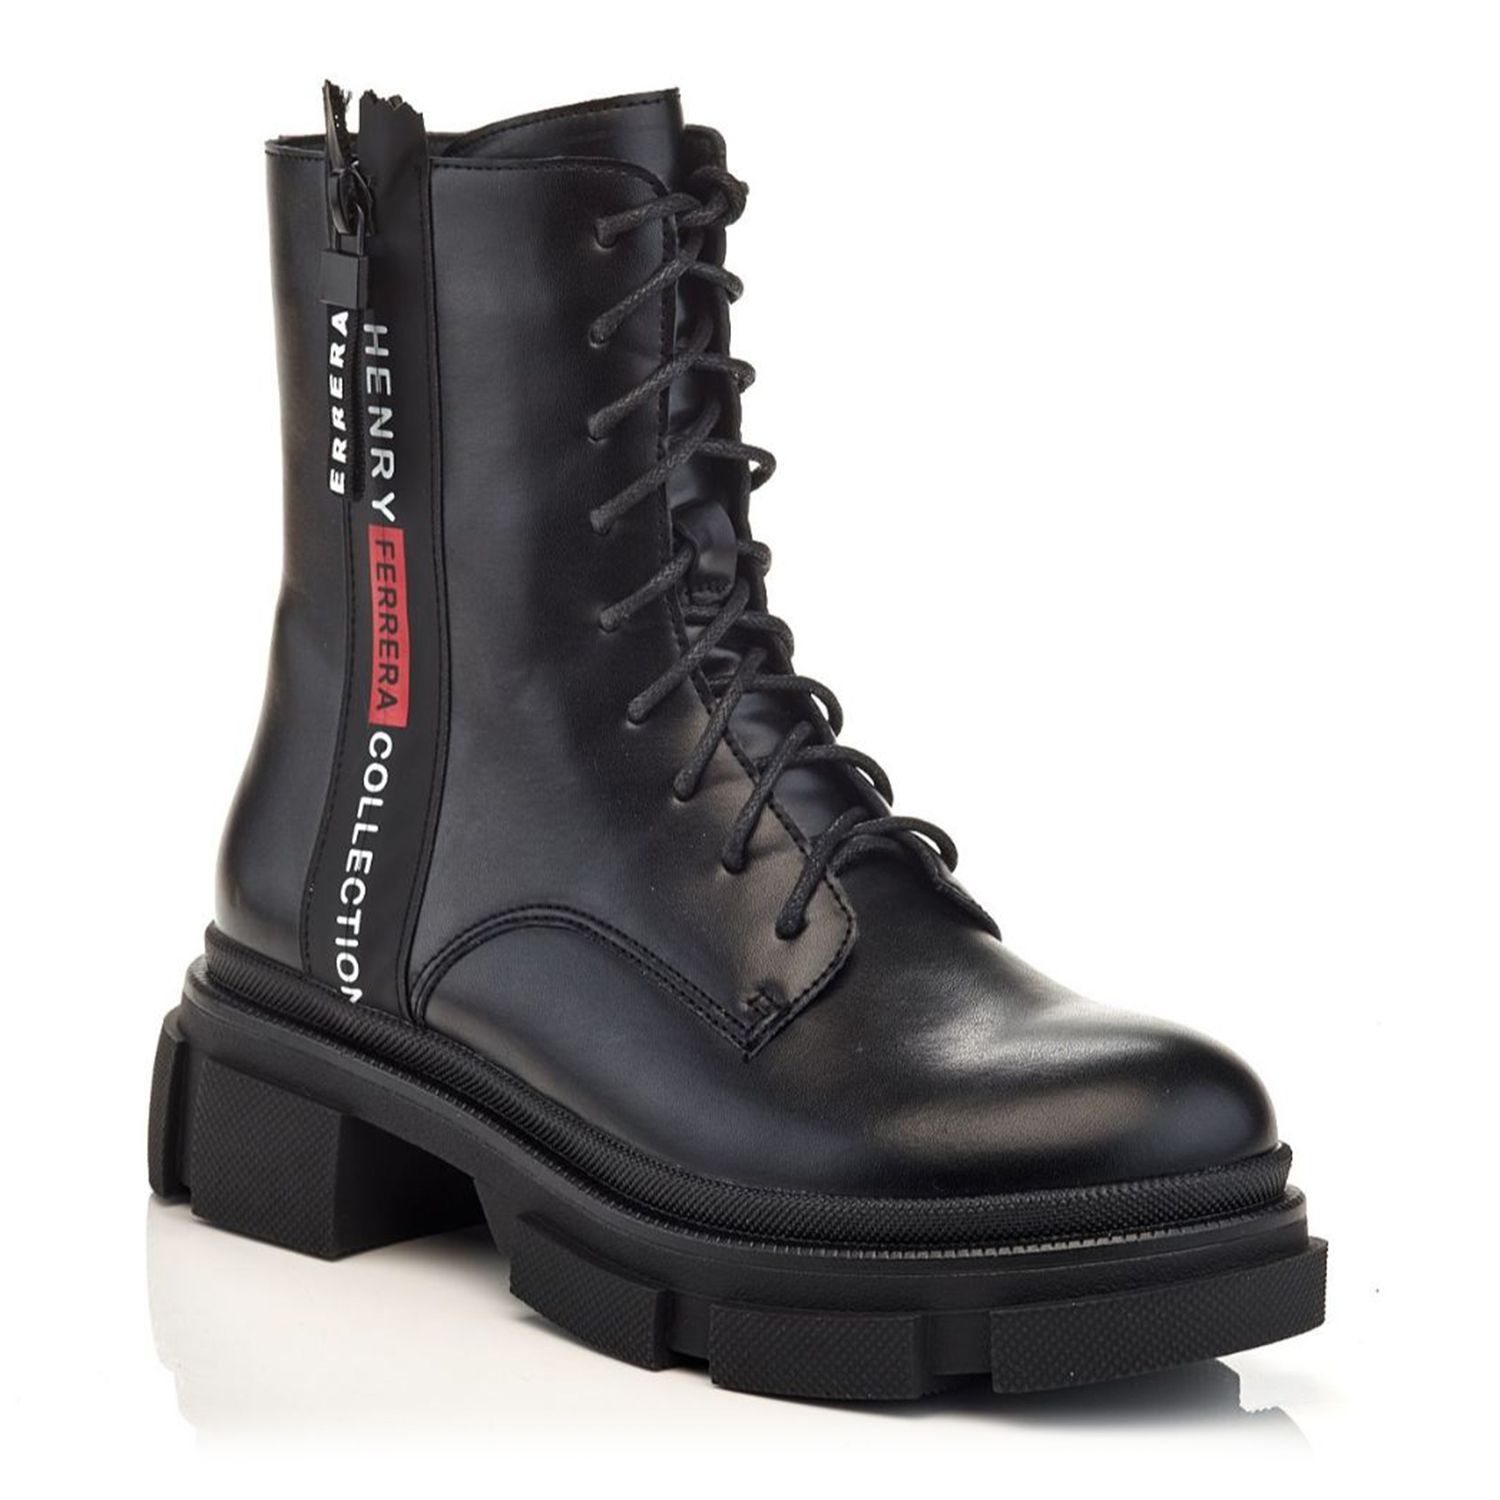 Image for Henry Ferrera Cali 200 Women's Combat Boots at Kohl's.